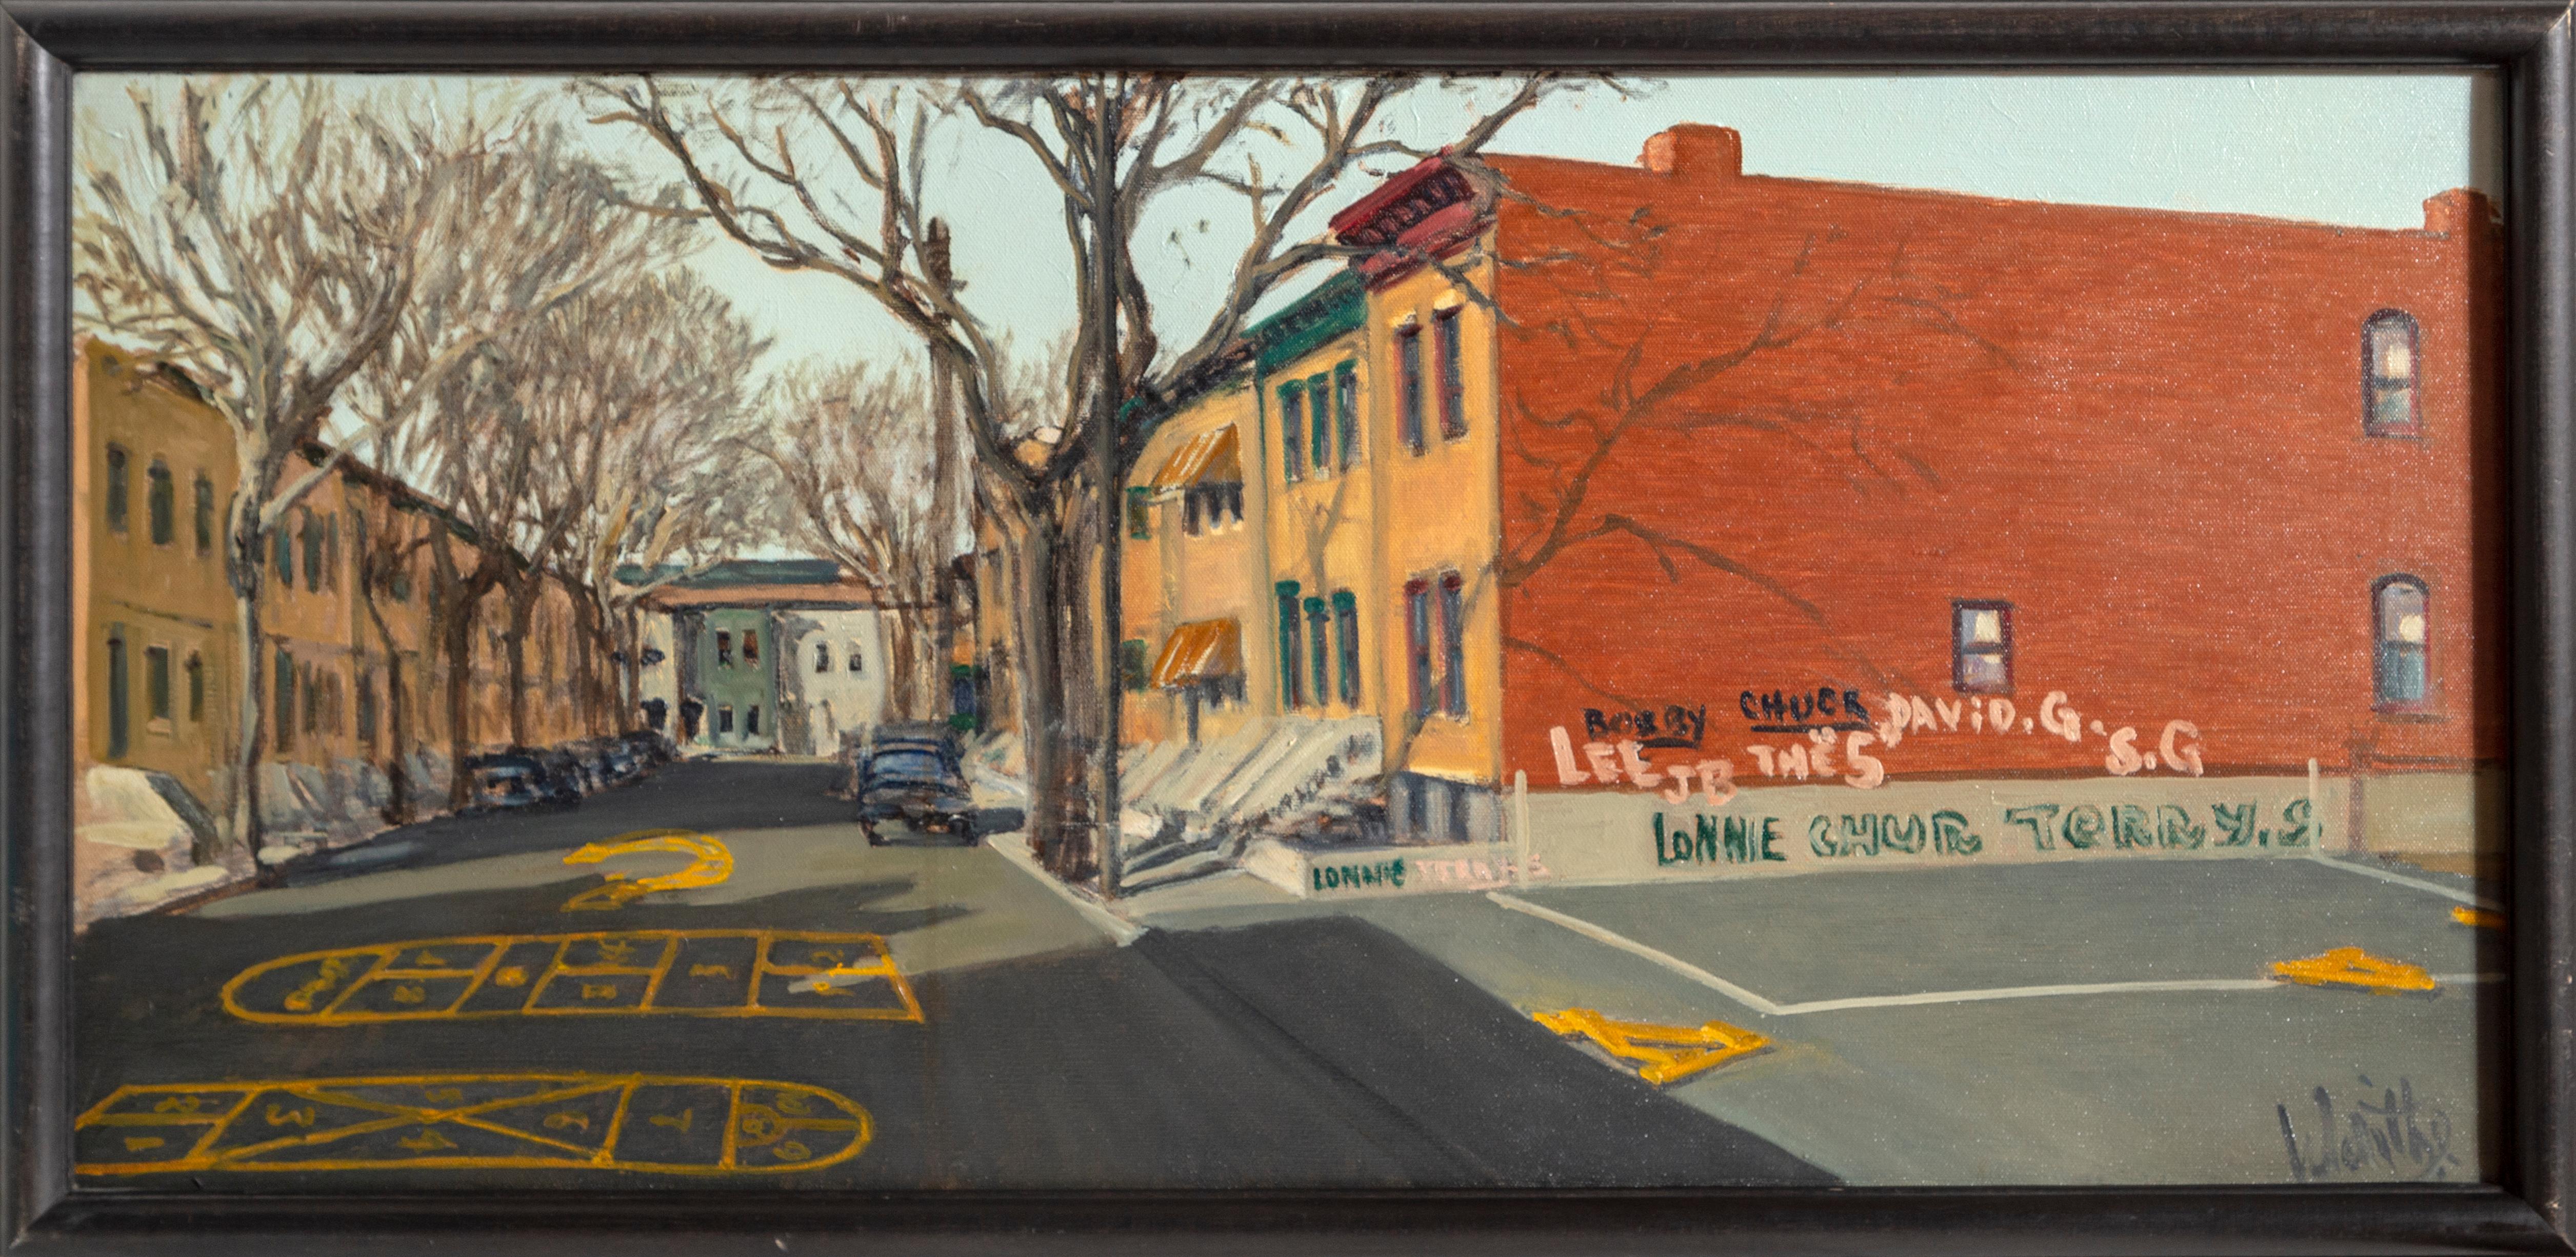 Born in Harlem, William Waithe studied painting, drafting and architecture at New York University and Queens College. He was known for painting outdoors, and is particularly identified with cityscapes. Waithe's background in architecture shows in